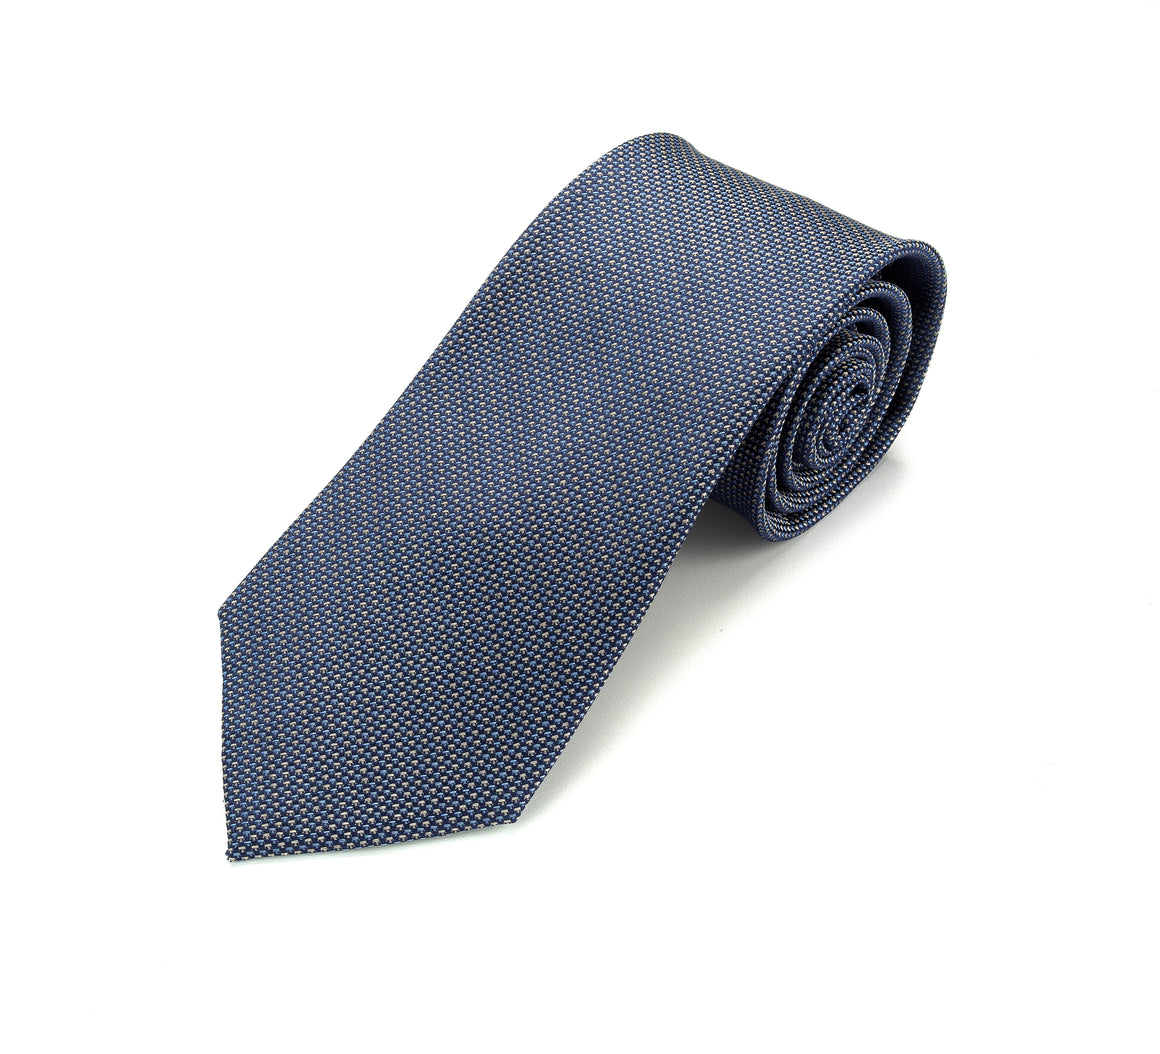 Enhance your corporate image with this essential, sophisticated tie | 1763